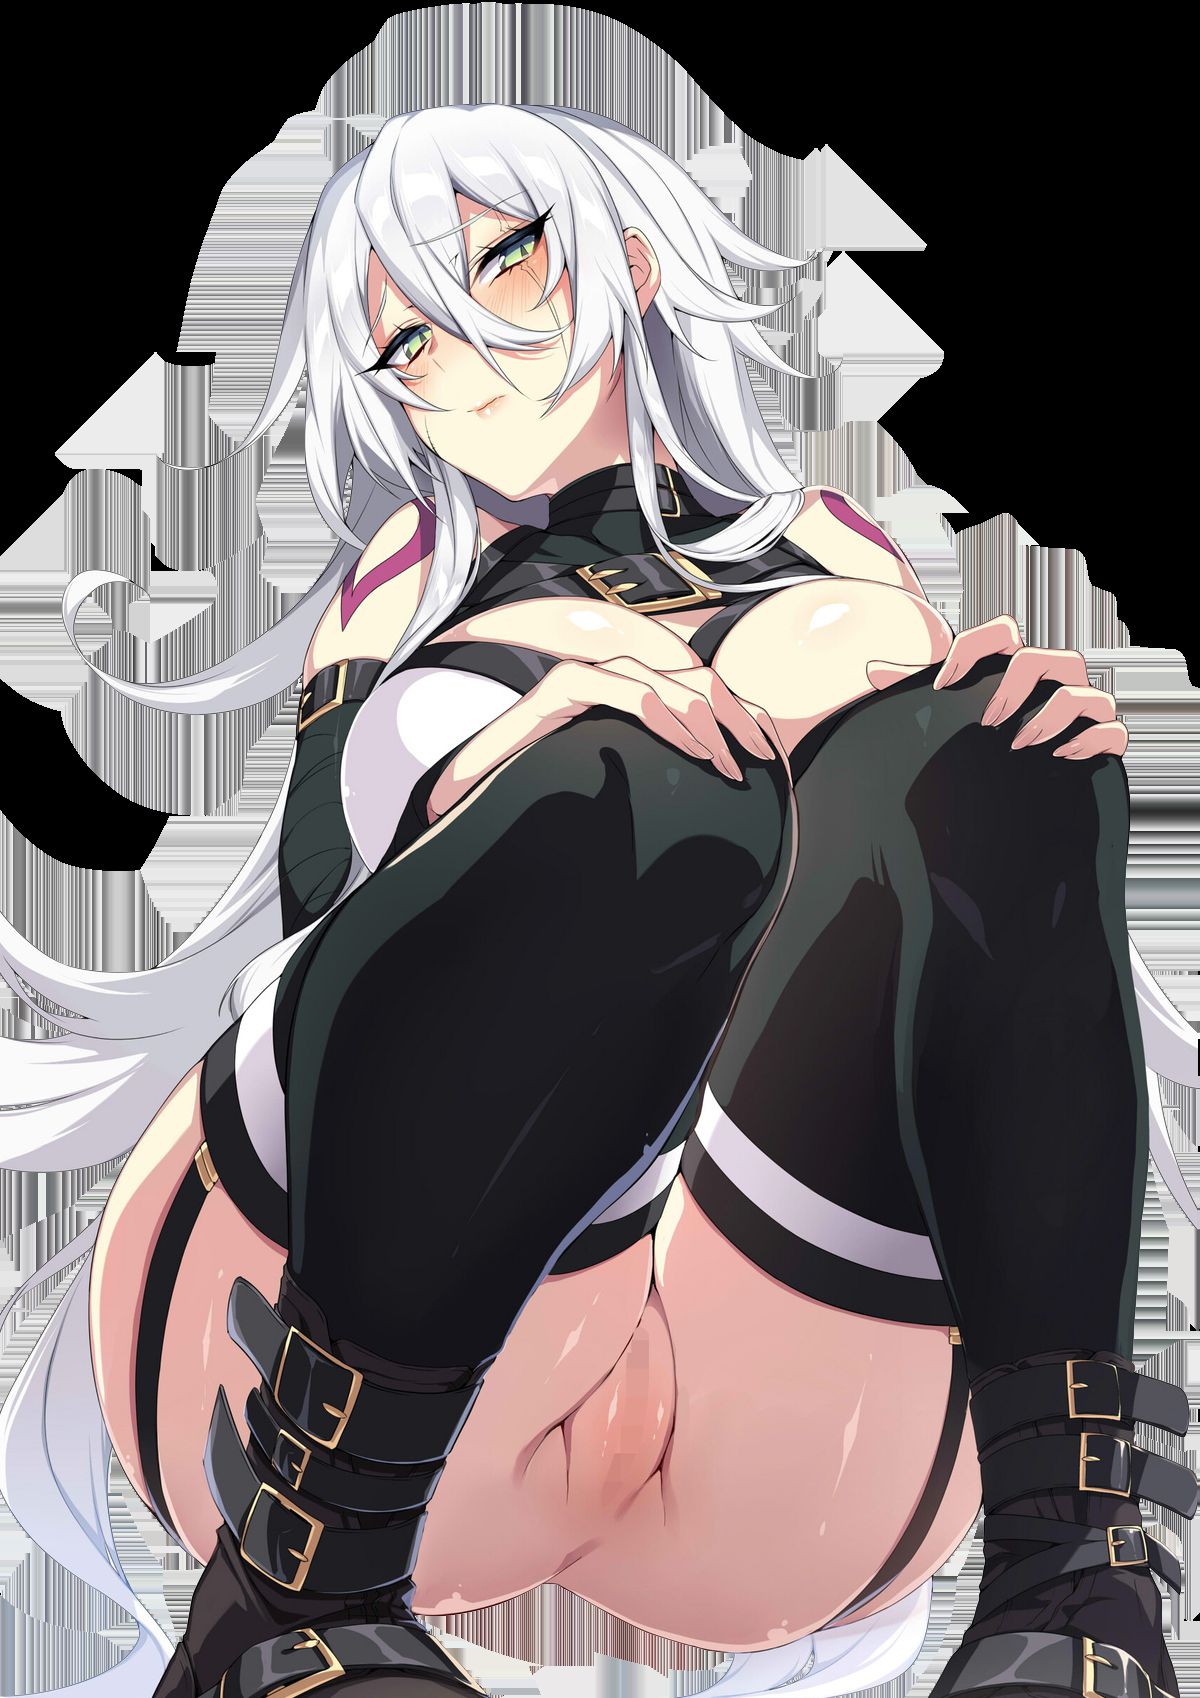 【Erocora Character Material】PNG background transparent erotic image such as anime characters Part 374 25